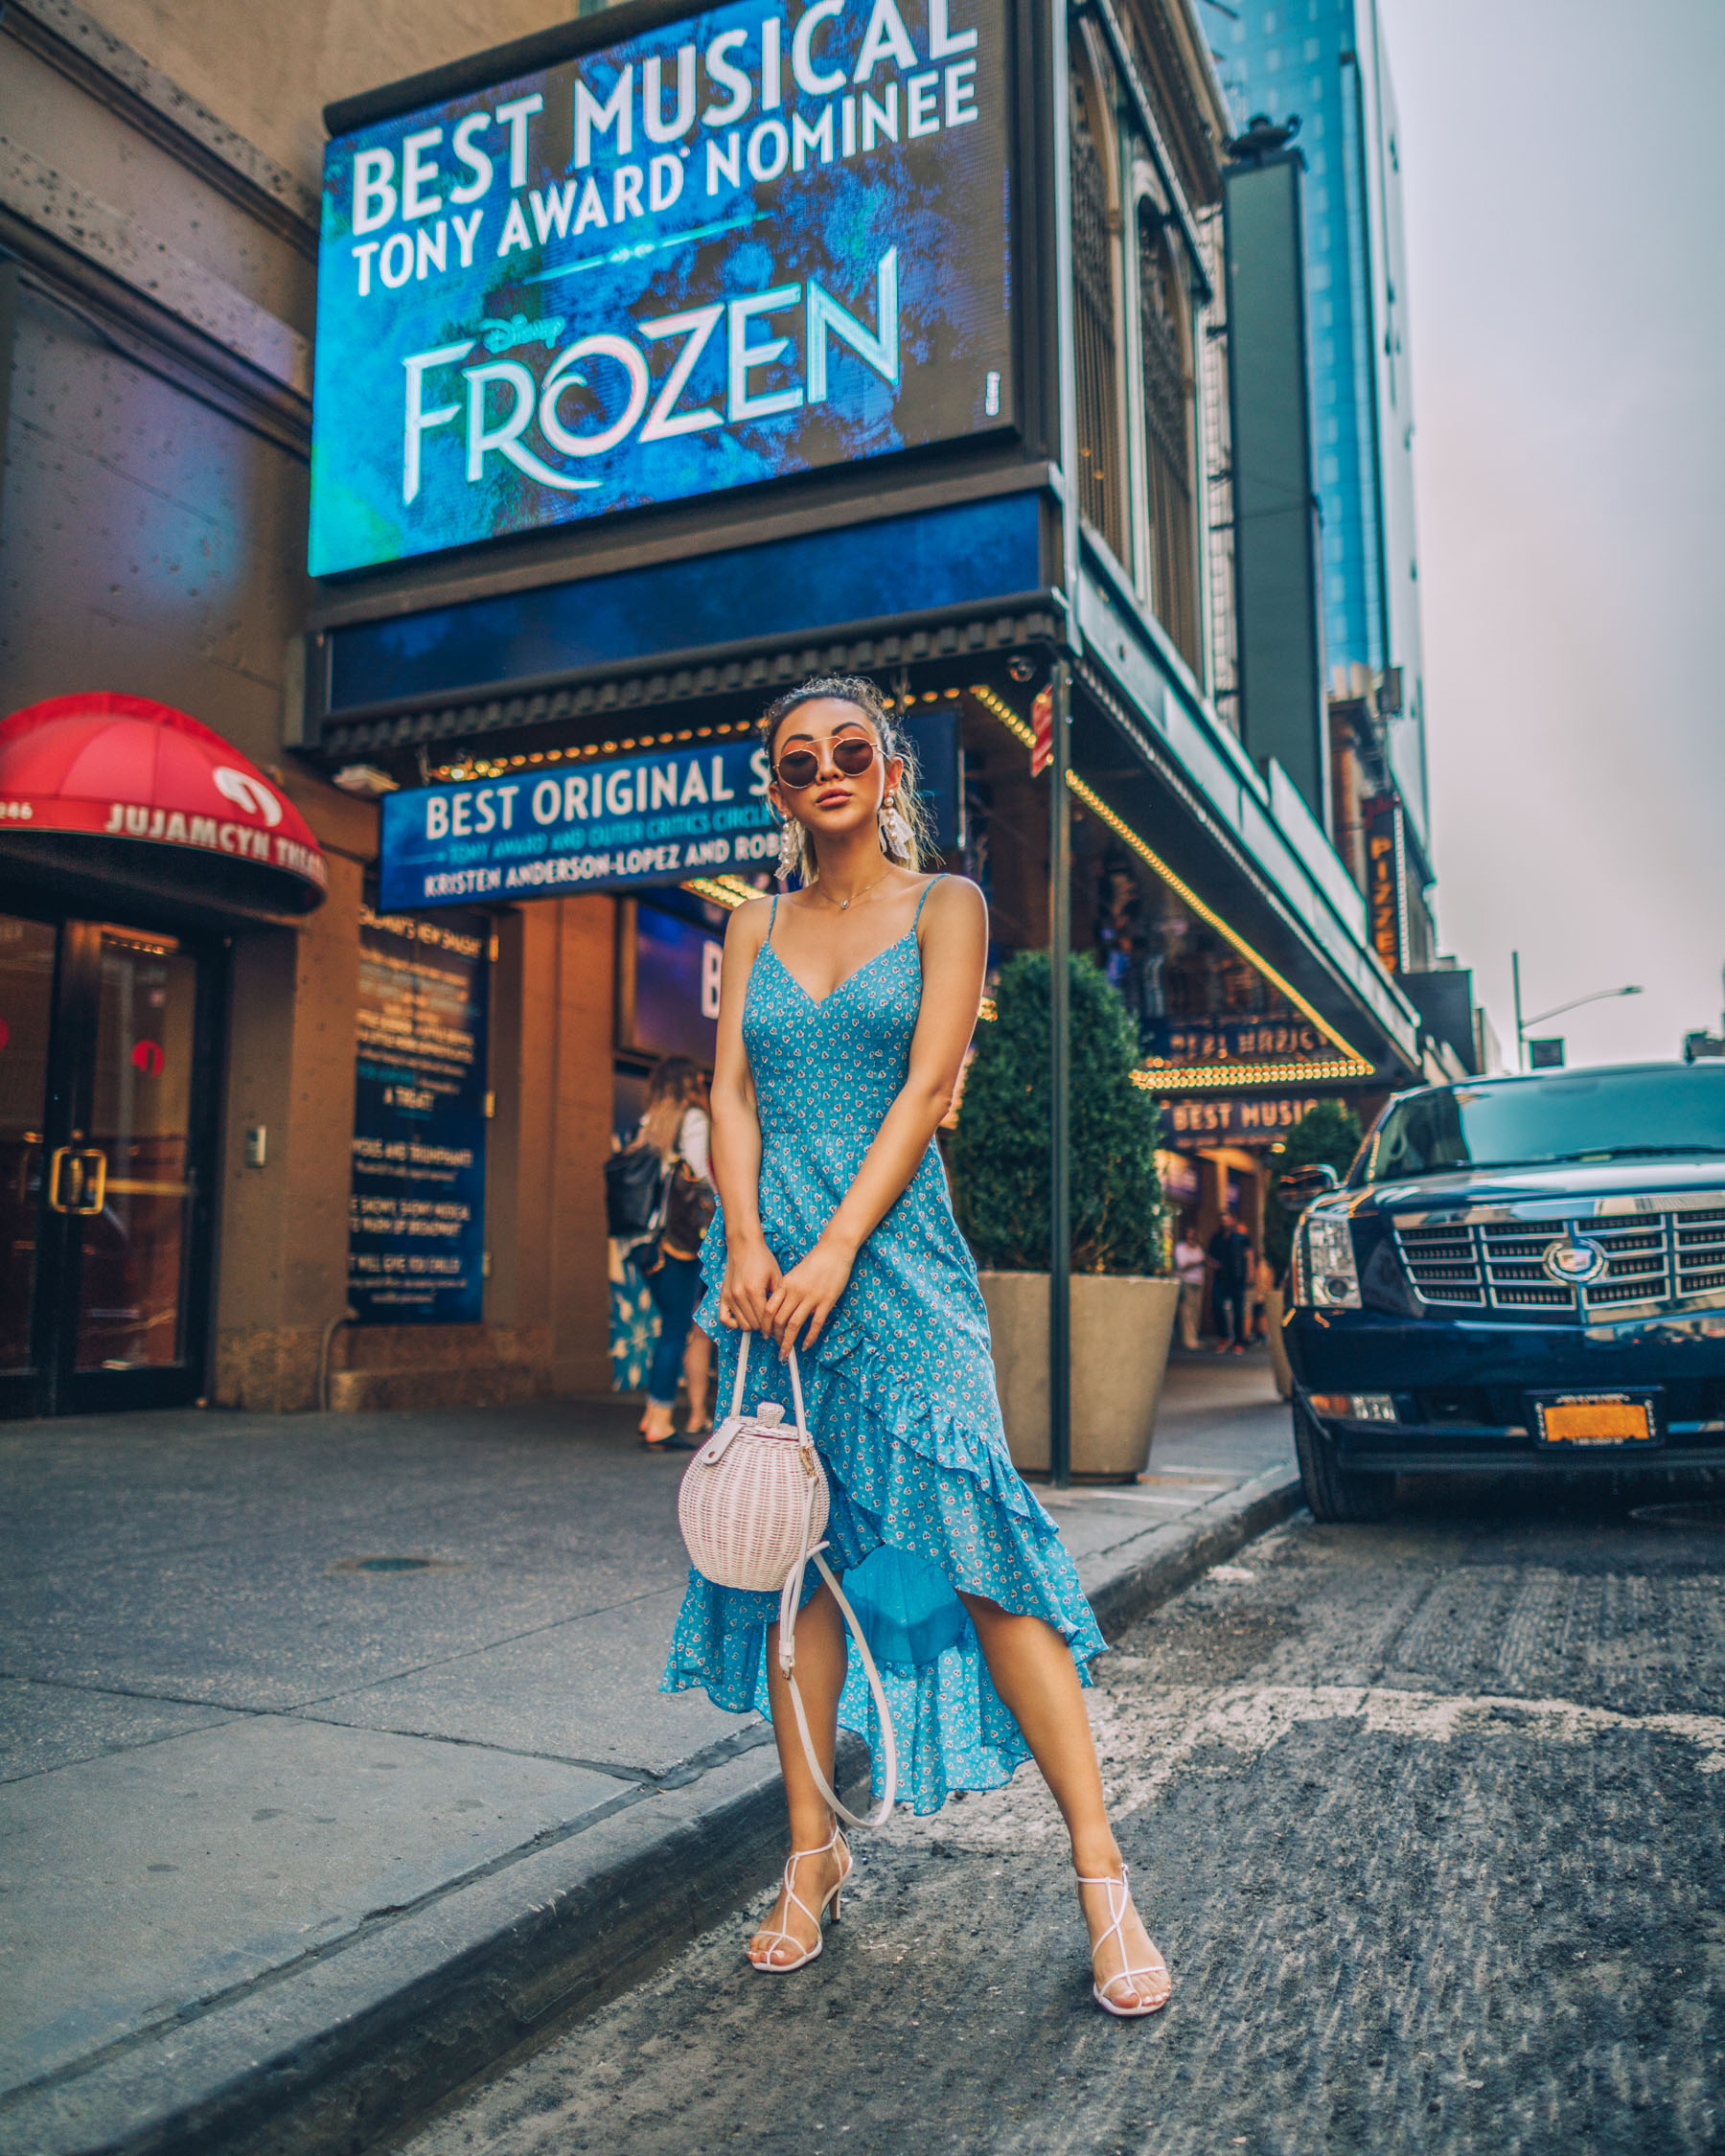 Outdated shoe trends and what to replace them with - Frozen Broadway, Blue Ruffle Dress, square toe sandals // Notjessfashion.com